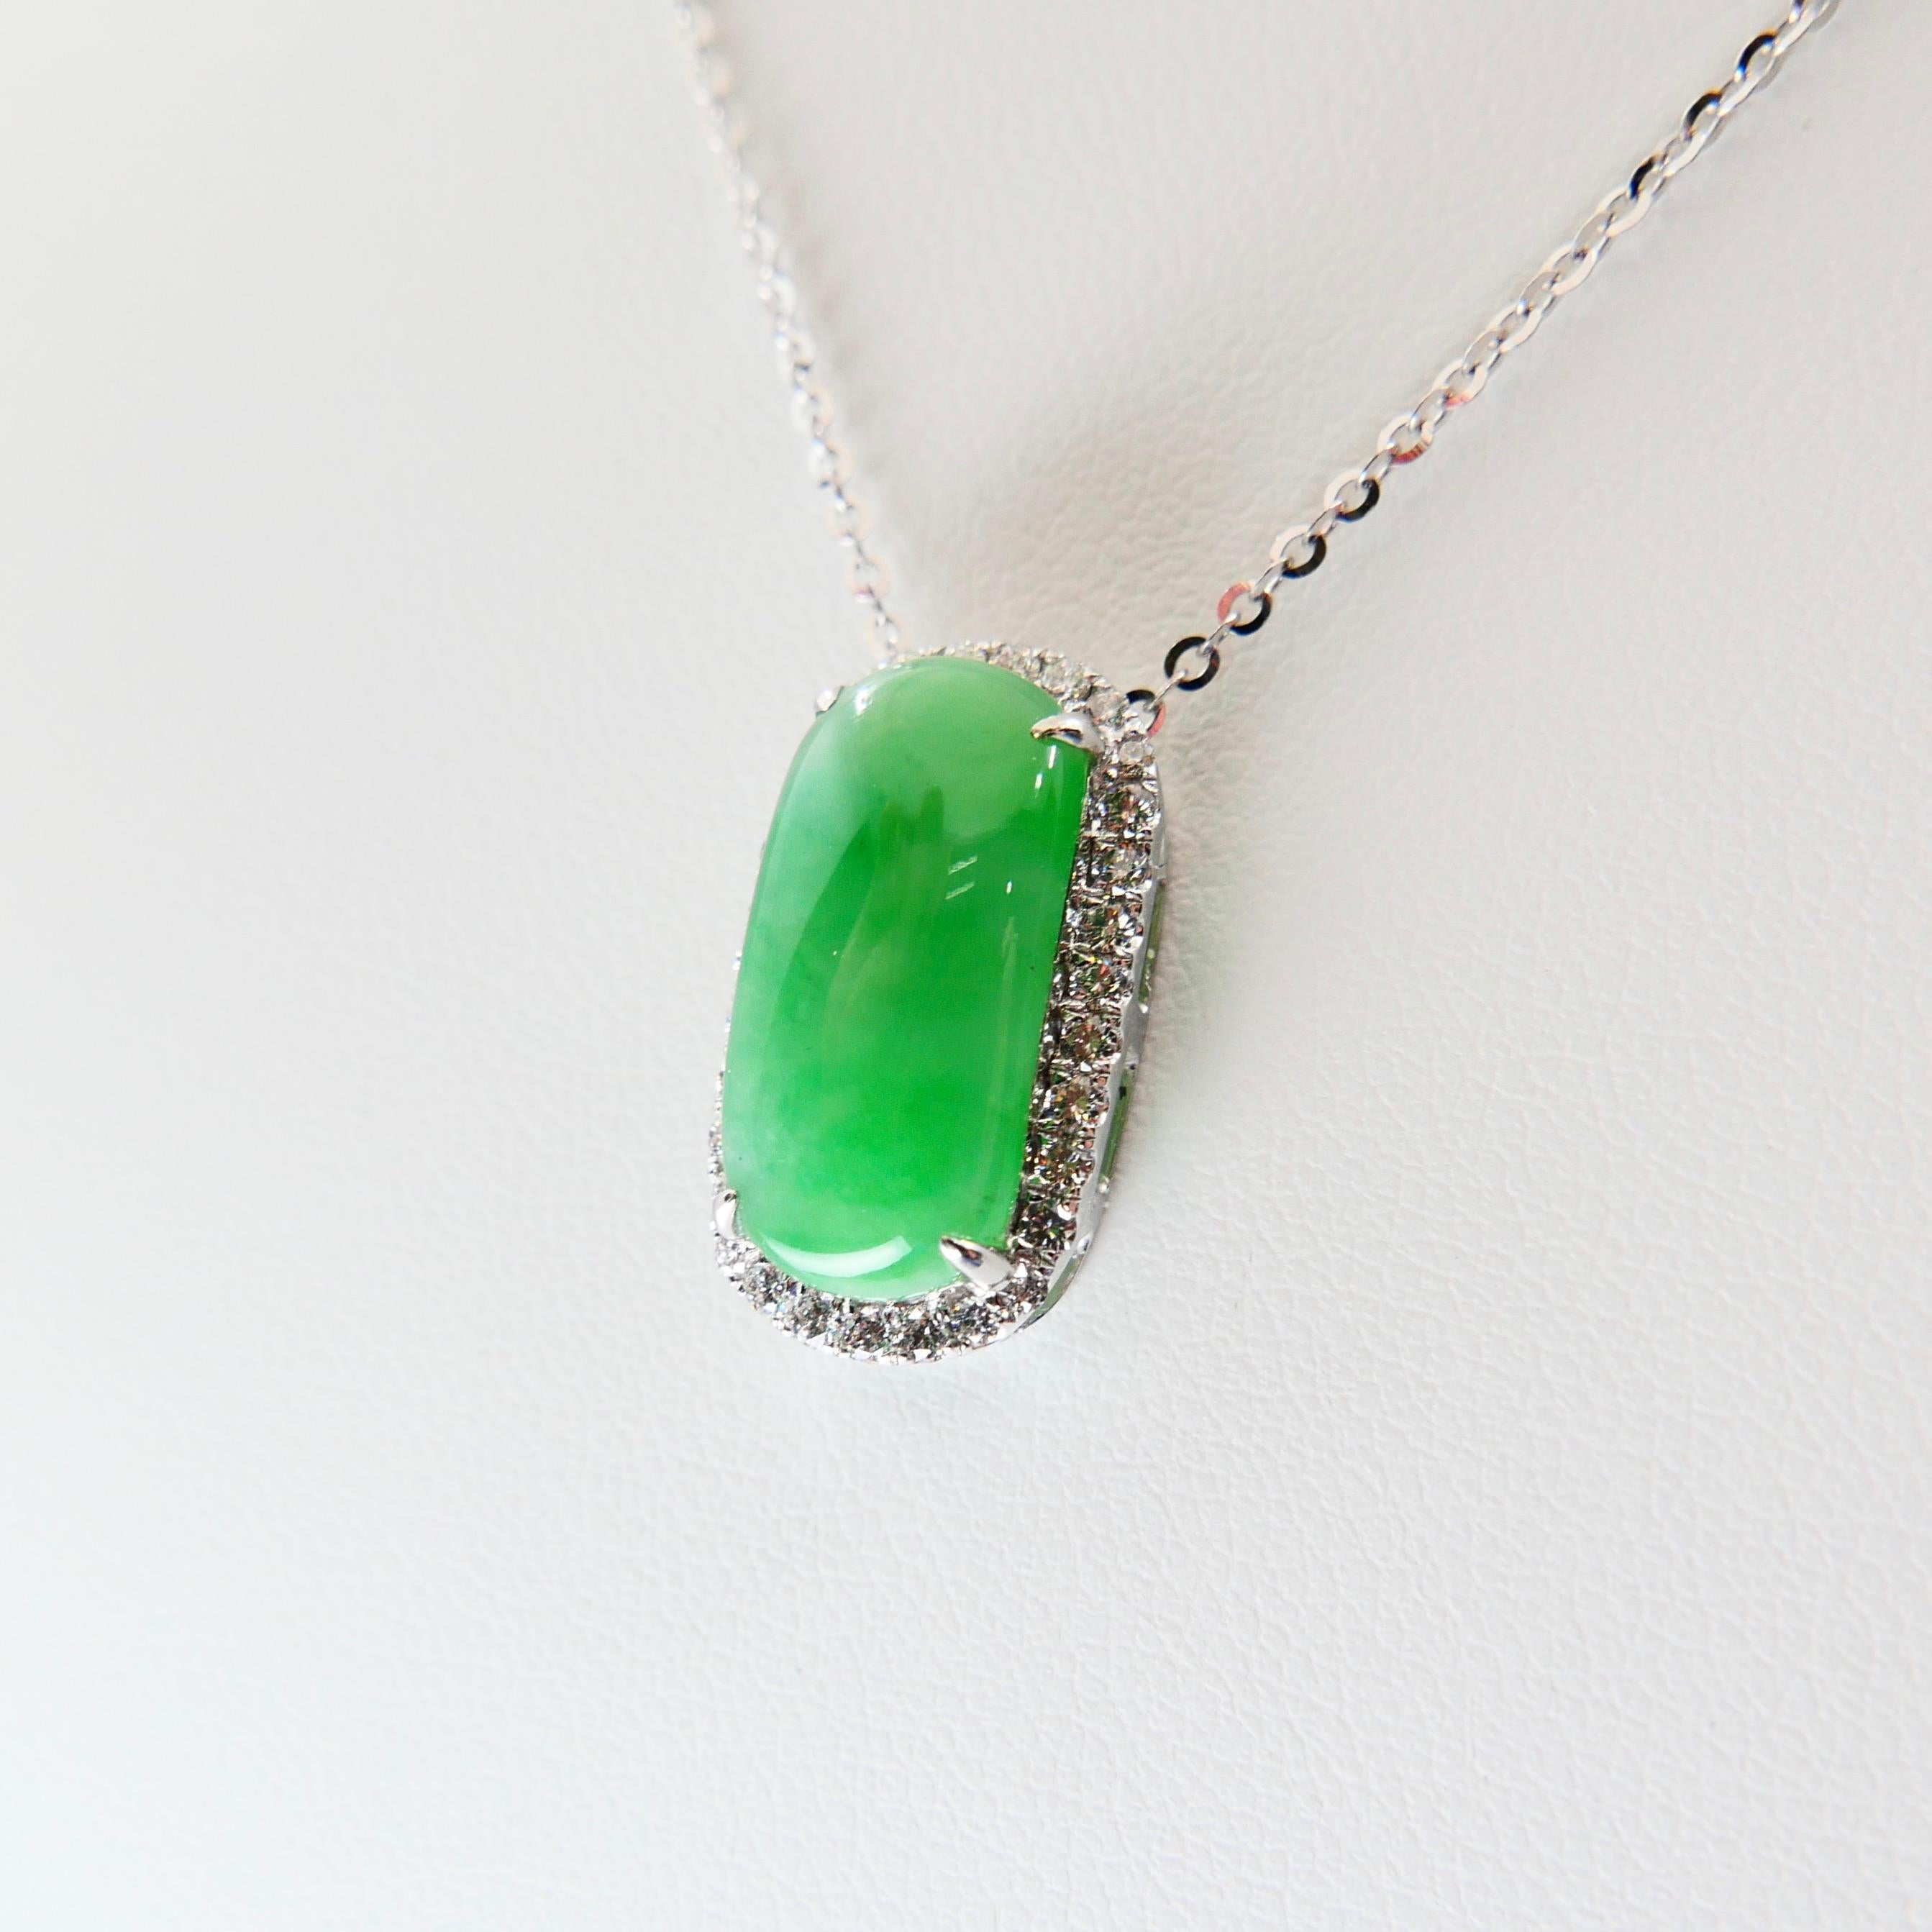 Certified Type A Jadeite Jade Diamond Pendant Drop Necklace, Apple Green Color In New Condition For Sale In Hong Kong, HK